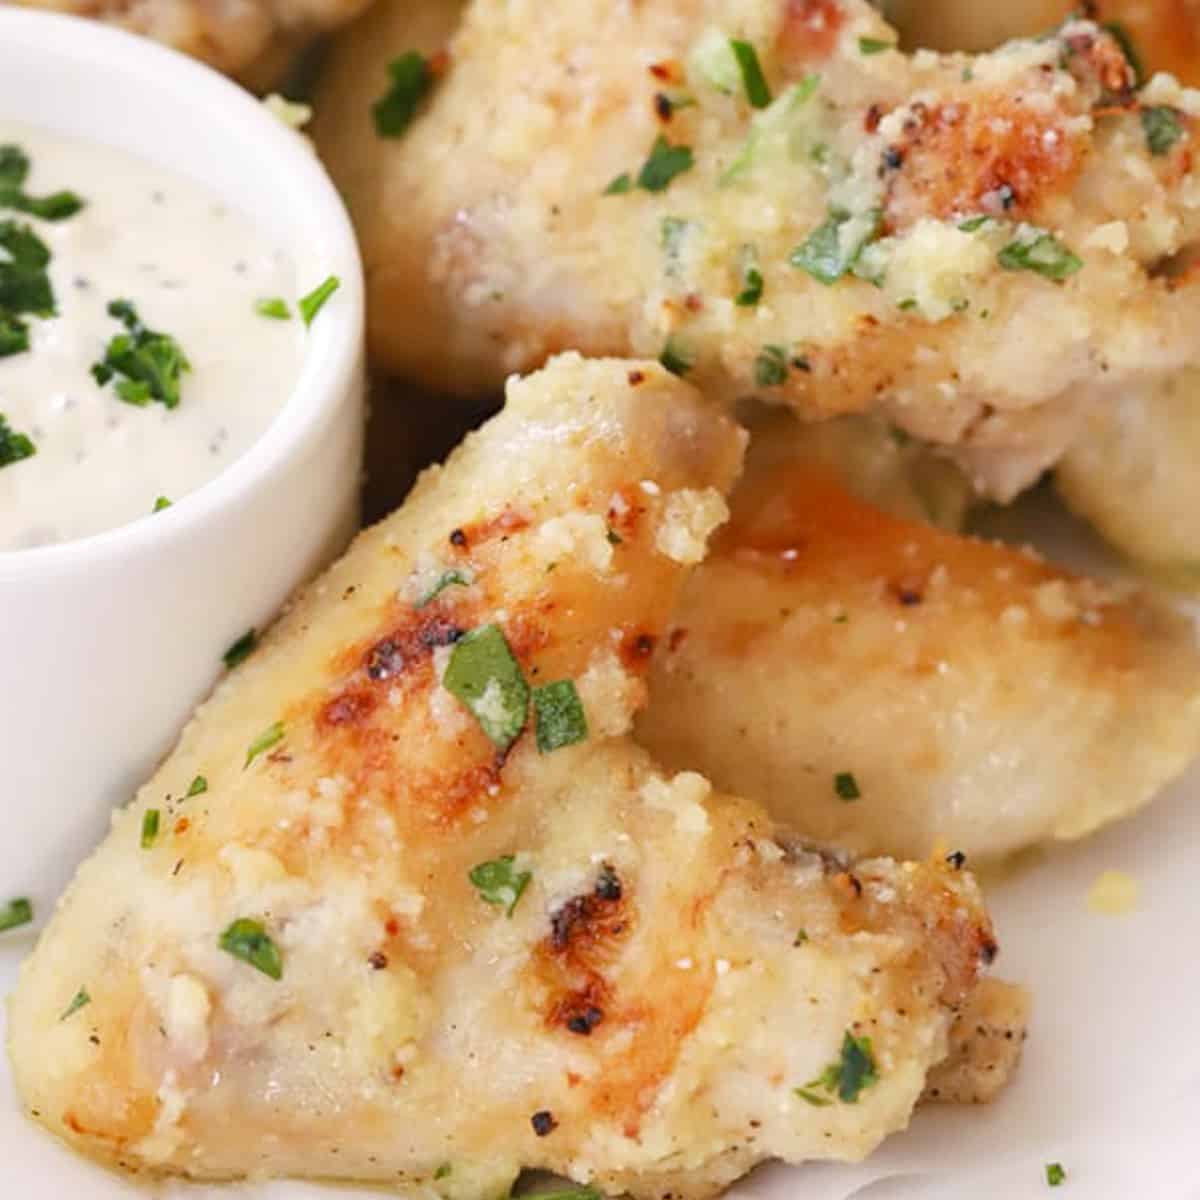 baked Garlic Parmesan chicken wings on a serving platter with a side bowl of dipping sauce, garlic parmesan wings recipe.garlic parmesan chicken wings.